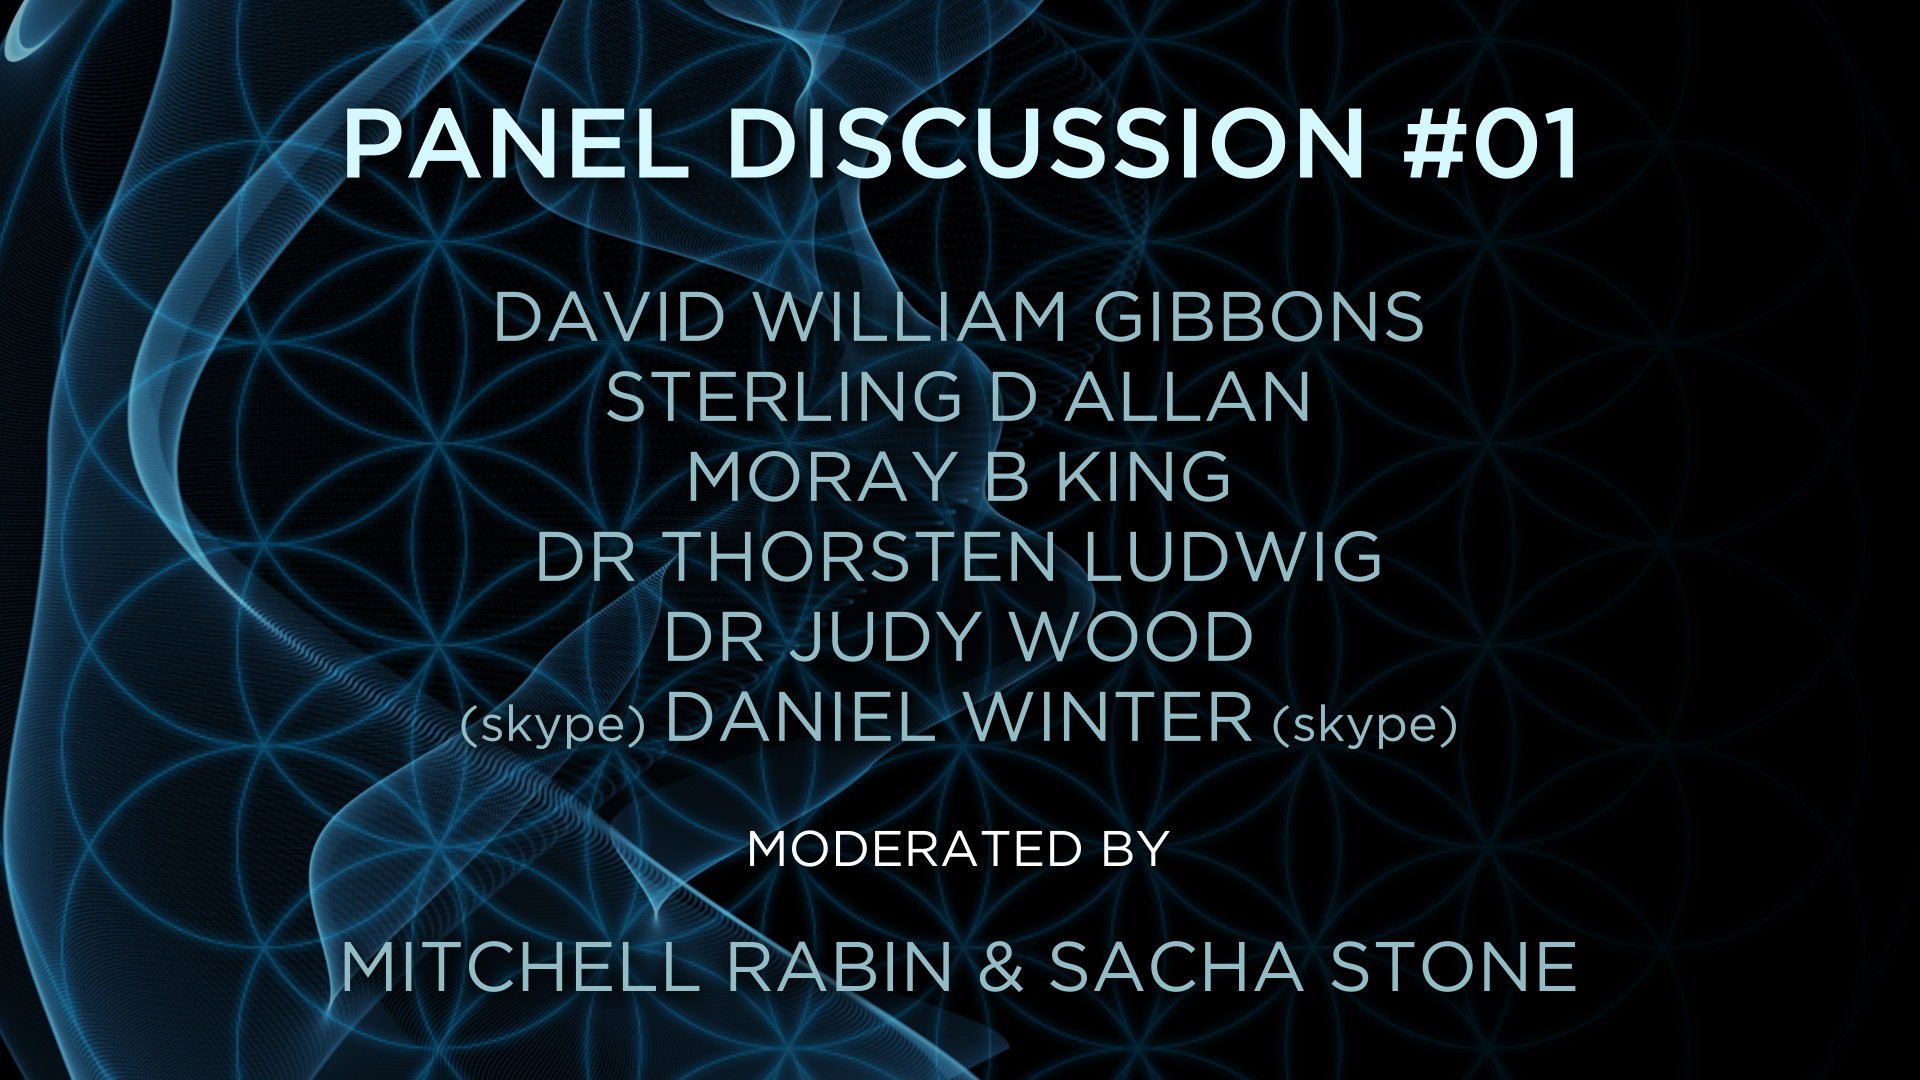 Panel Discussion #01